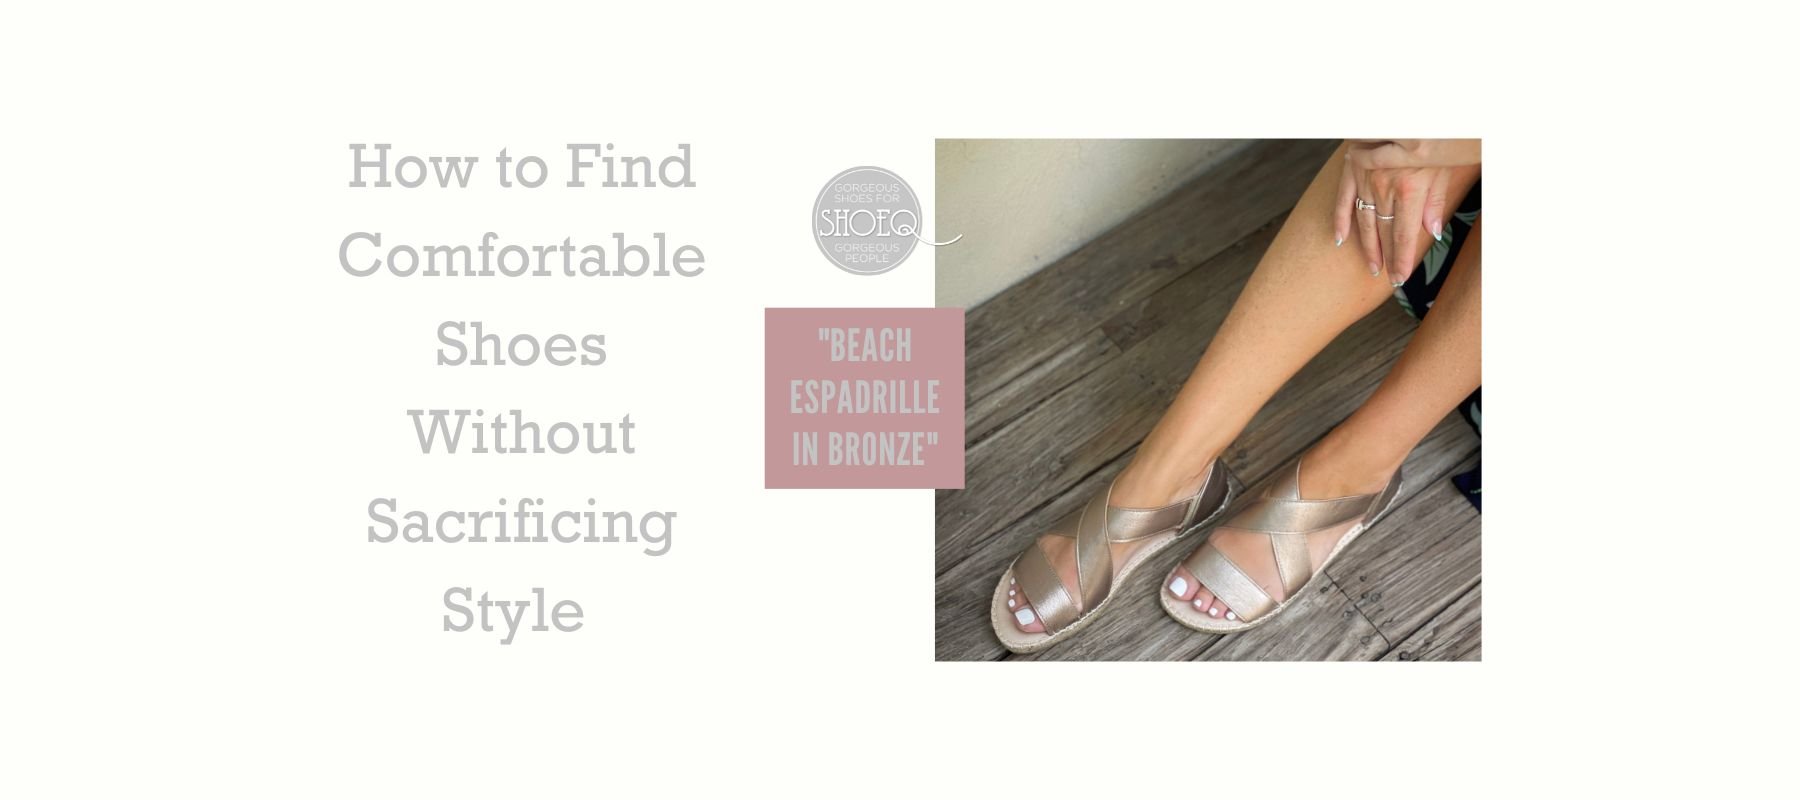 How to Find Comfortable Shoes Without Sacrificing Style? - Shoeq